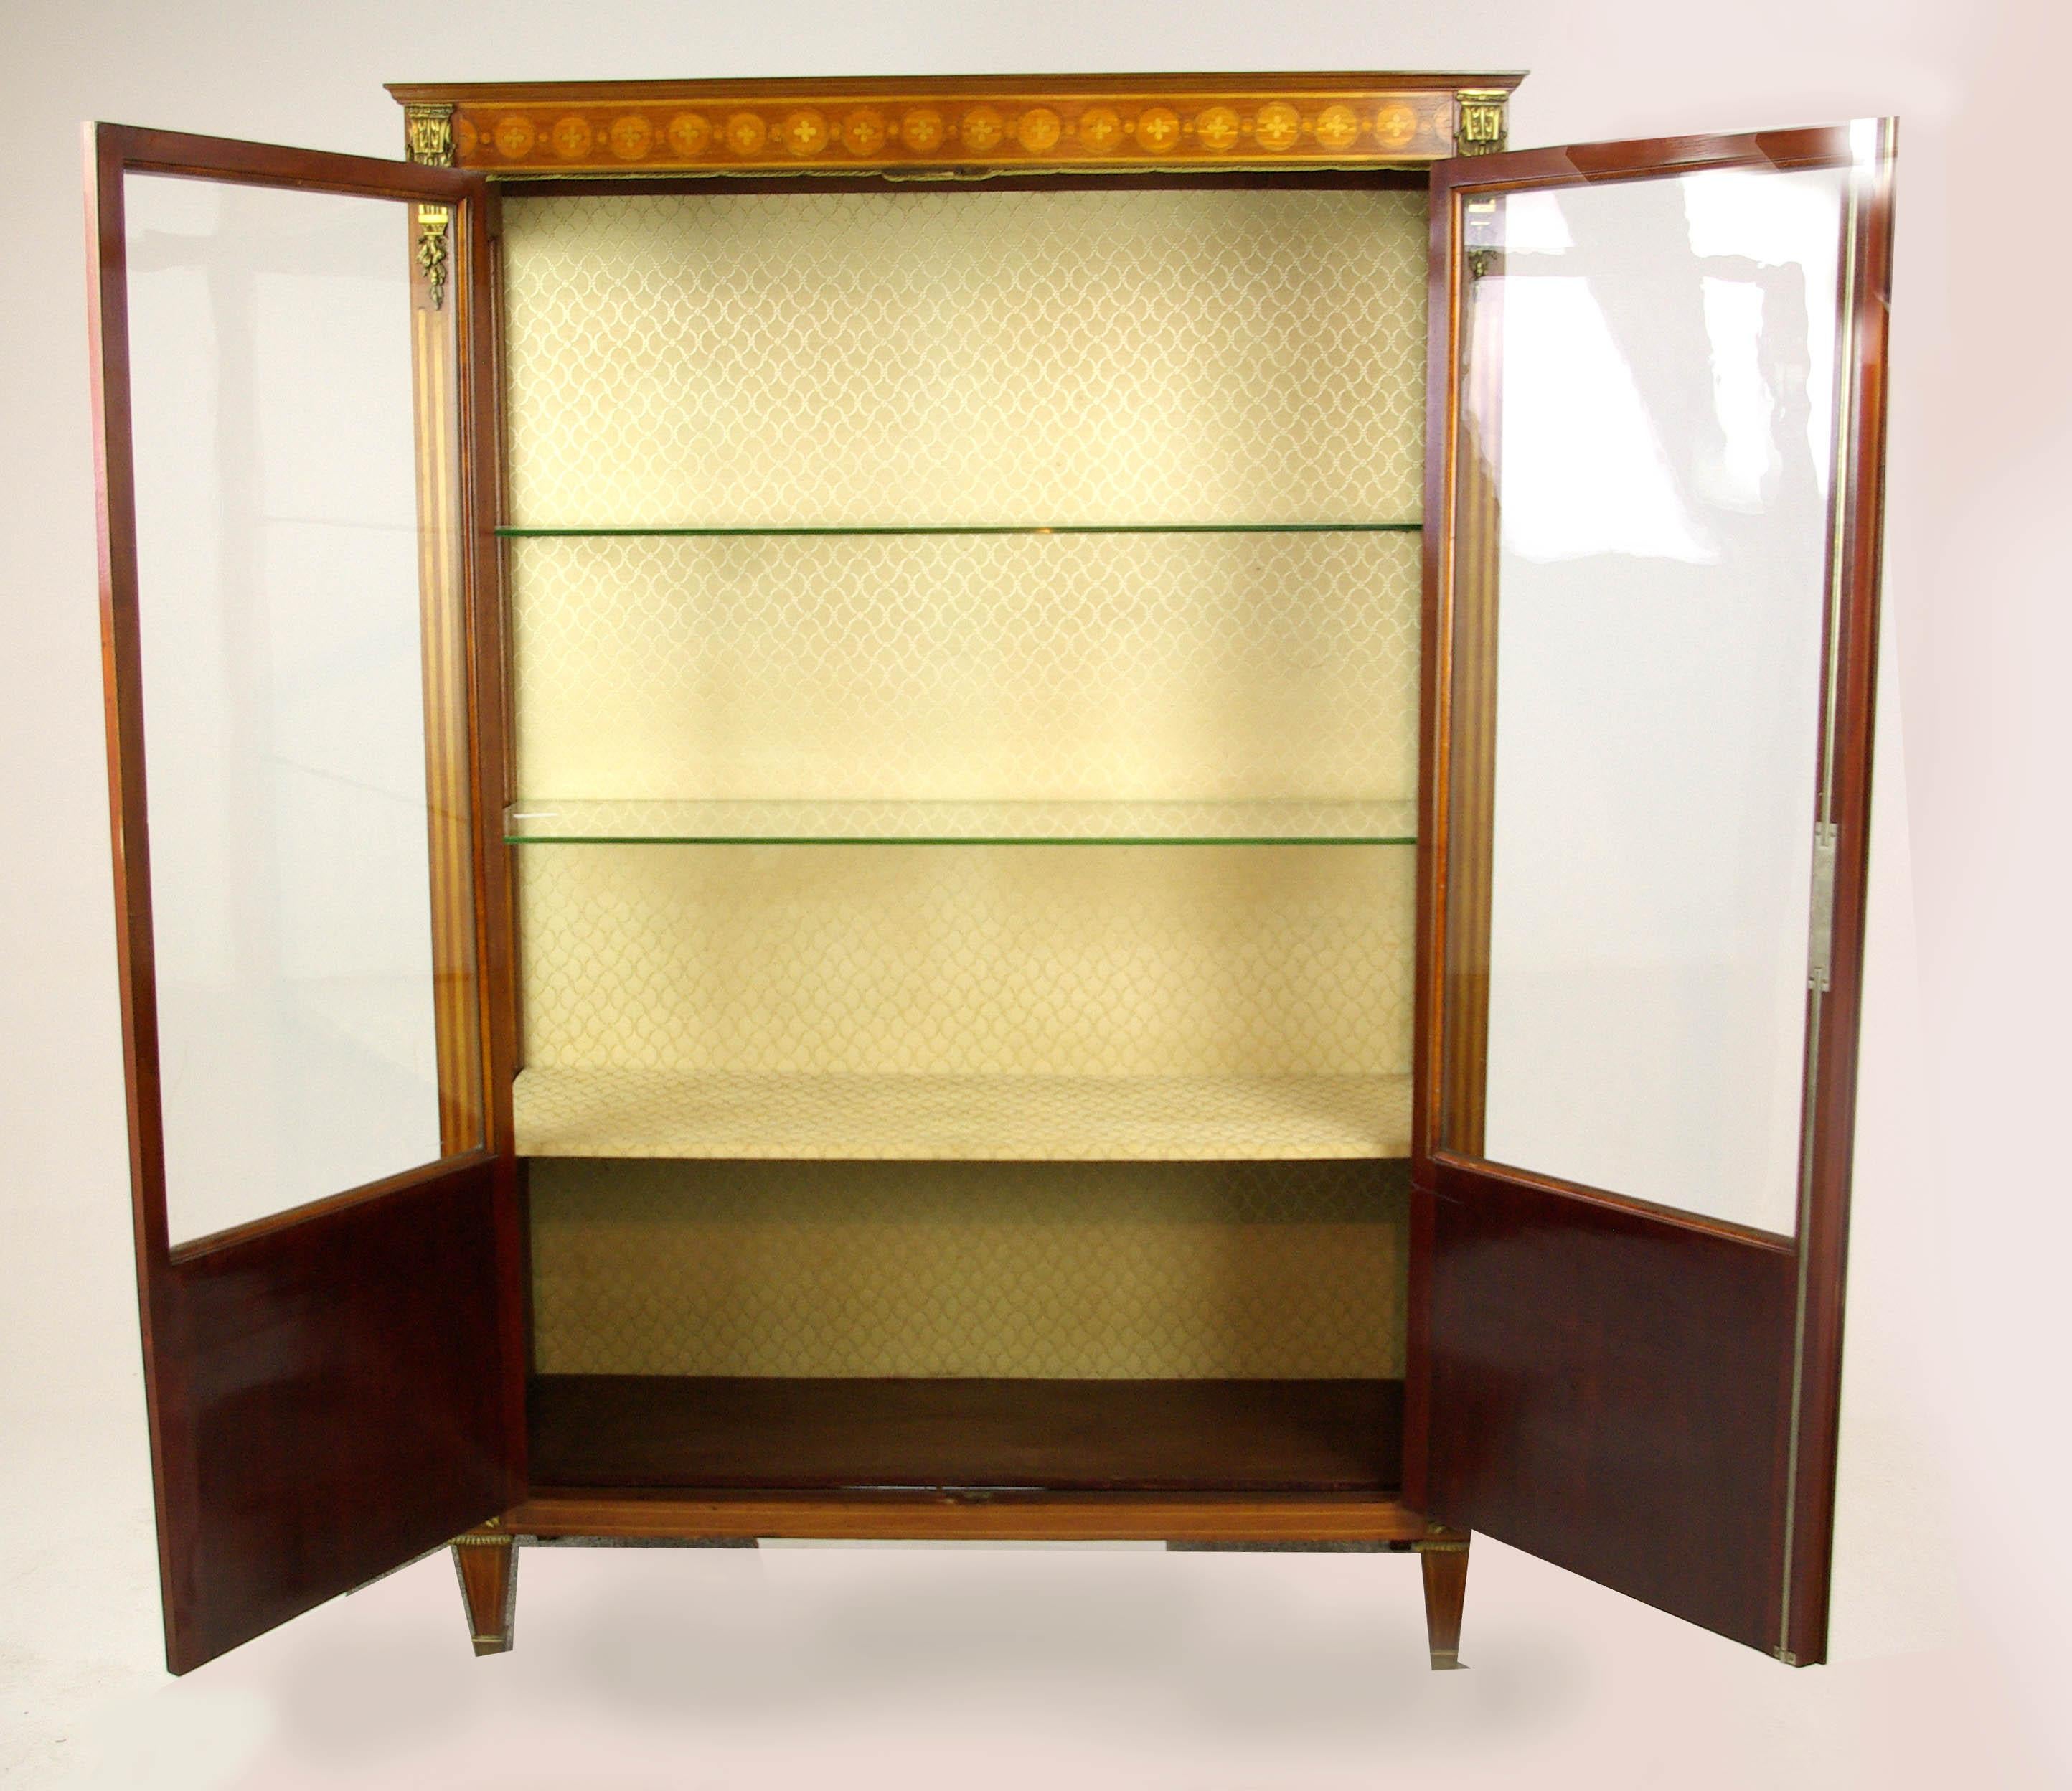 Antique display cabinet, curio cabinet, Louis XVl cabinet, Vitrine, France 1900, antique furniture, B1295

France 1900
Molded top above, inlaid frieze below
Decorated ormolu mounts to the top
Glass doors below
Open to reveal plate glass